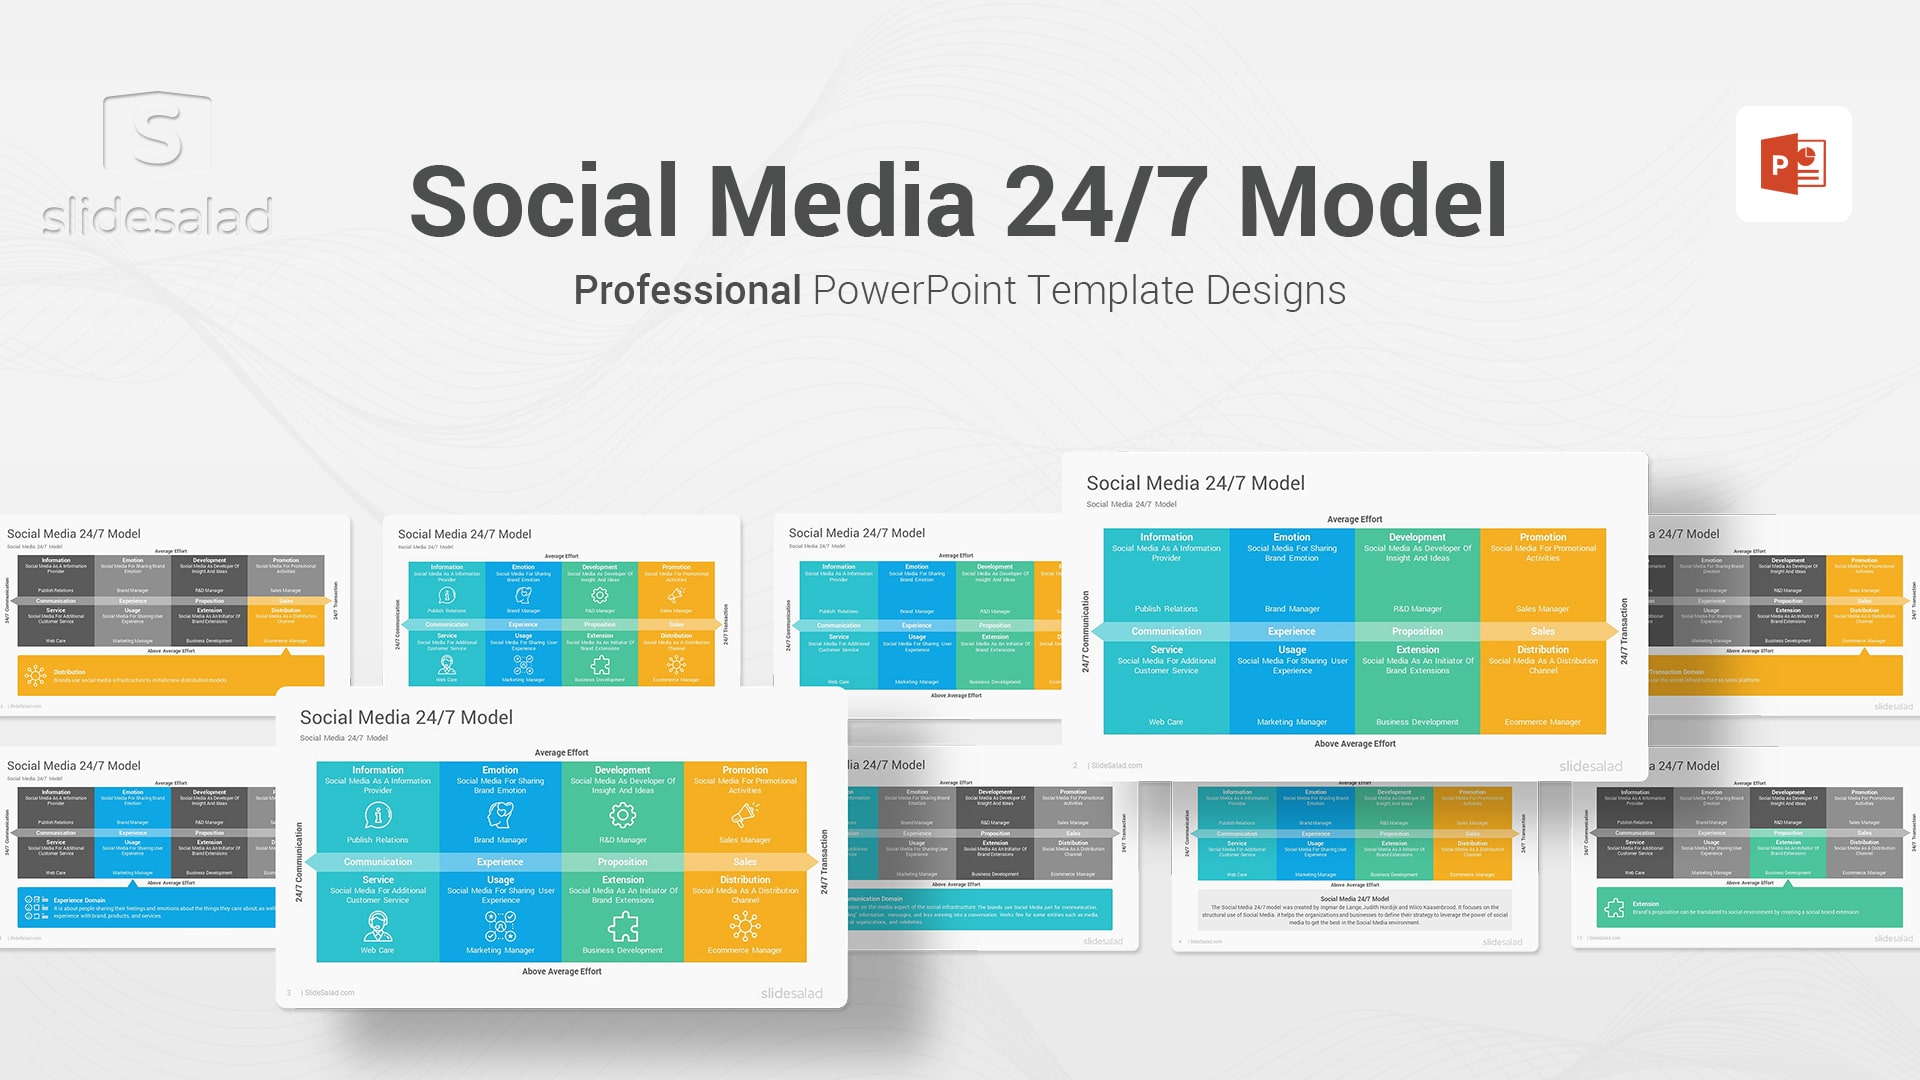 Social Media 24/7 Model PowerPoint Template - Social Media Sales Examples on PPT Templates